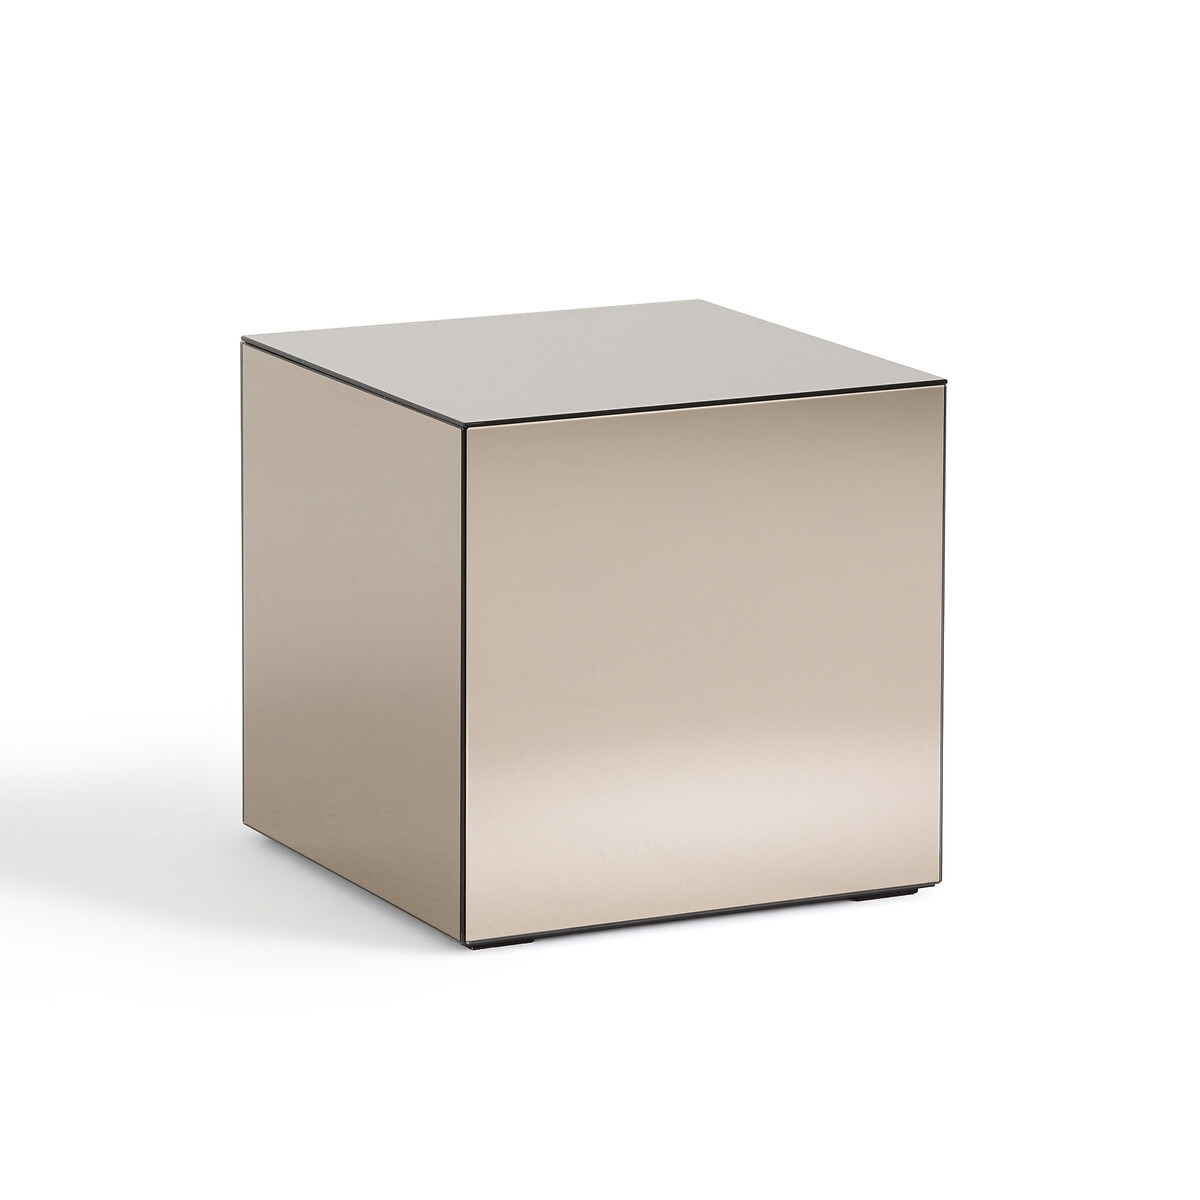 Lumir Mirrored Bedside / Side Table - image 1